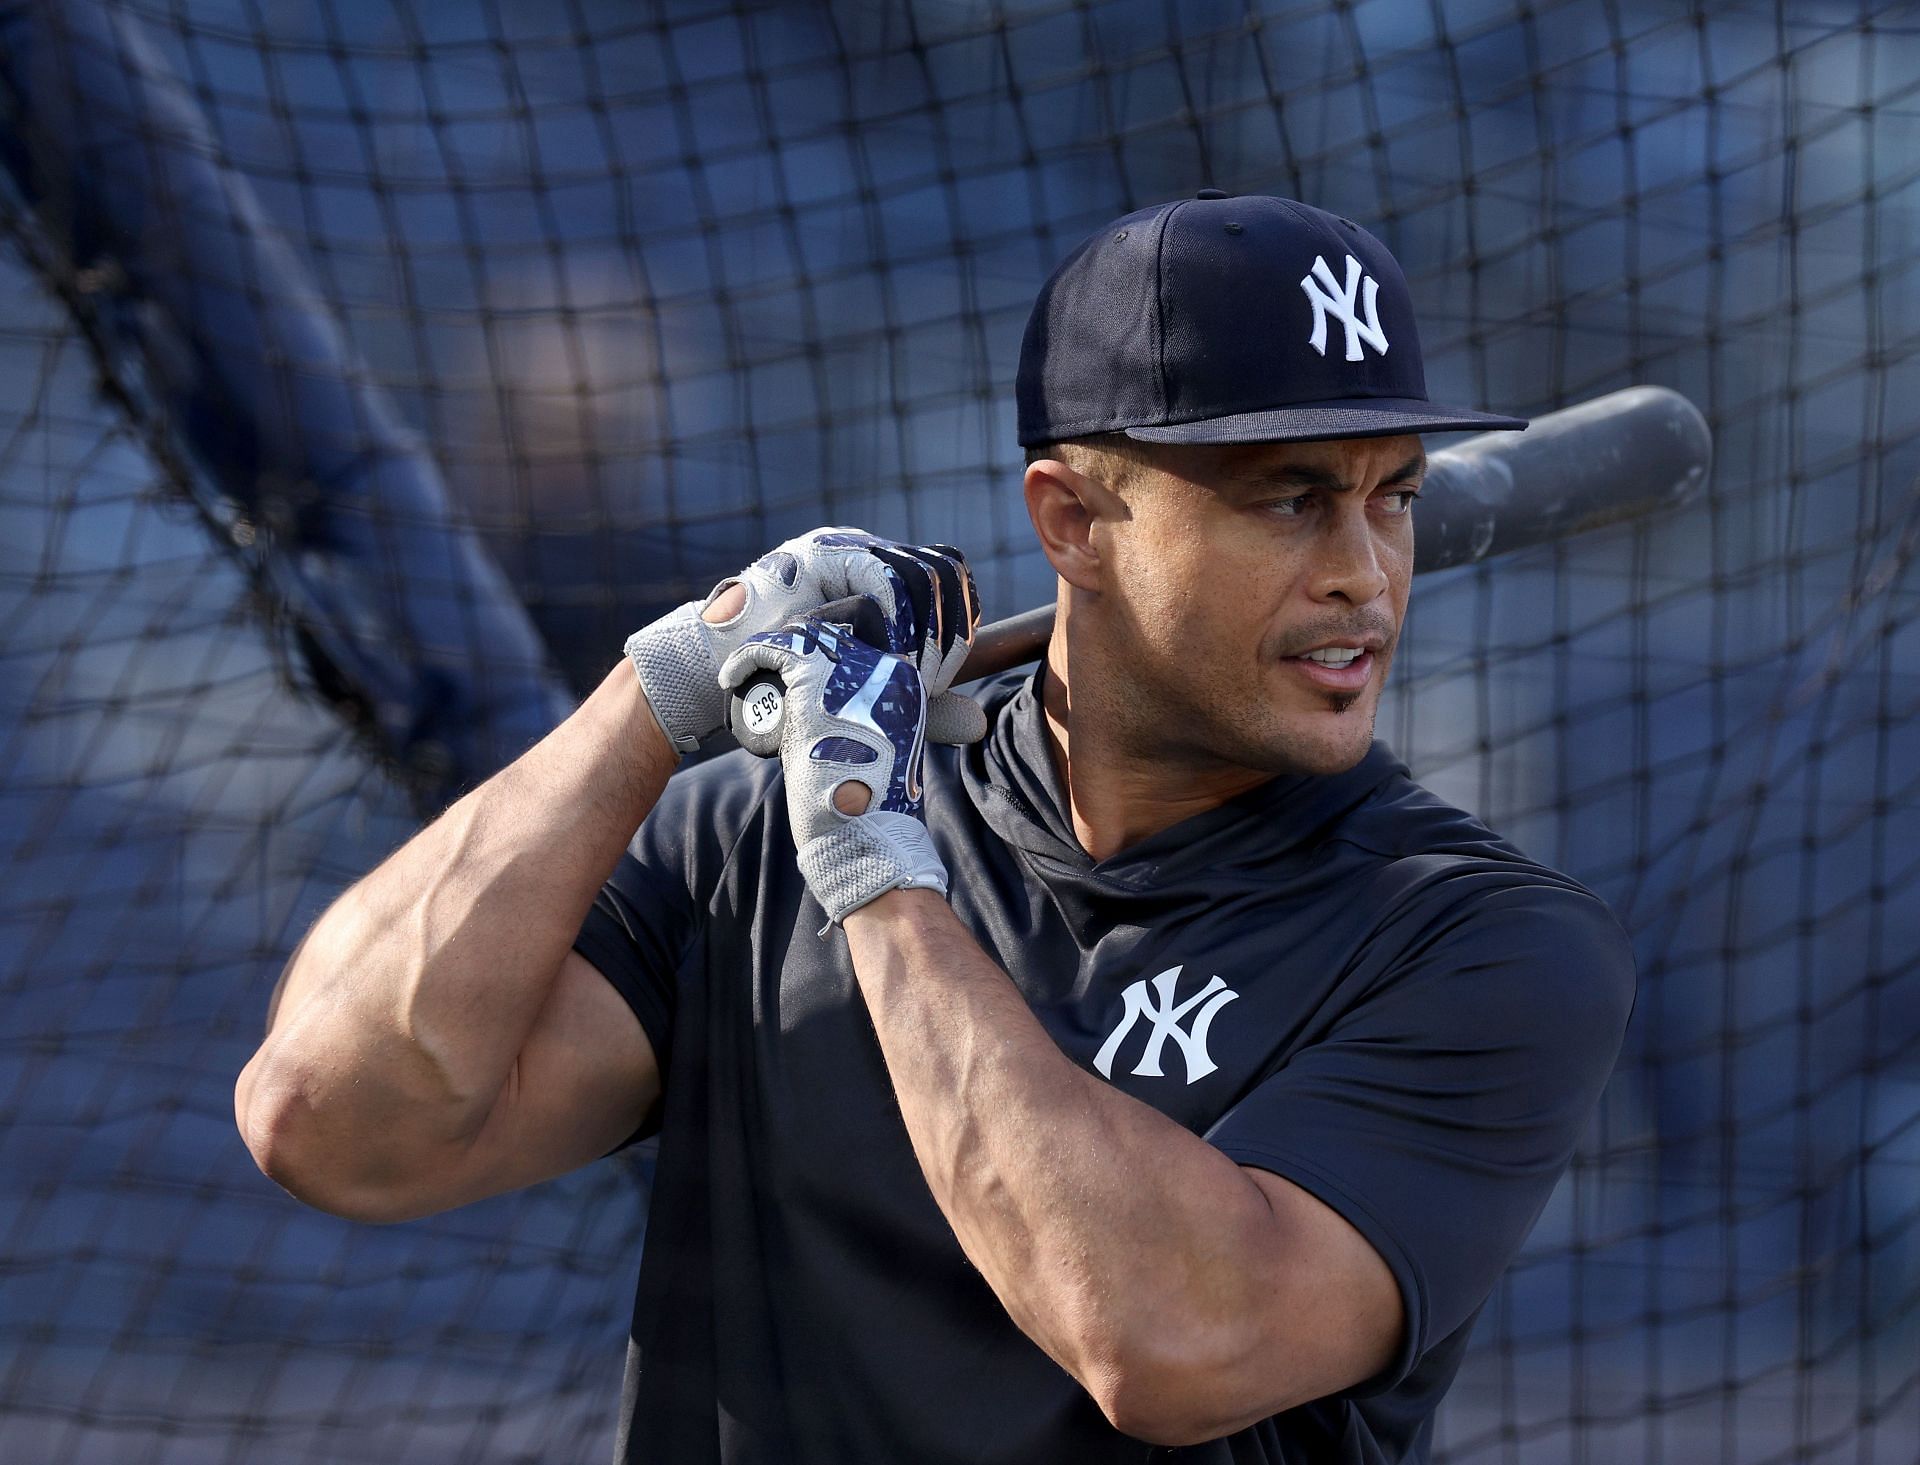 Yankees Mailbag: Trade deadline, the 2022 infield, and Giancarlo